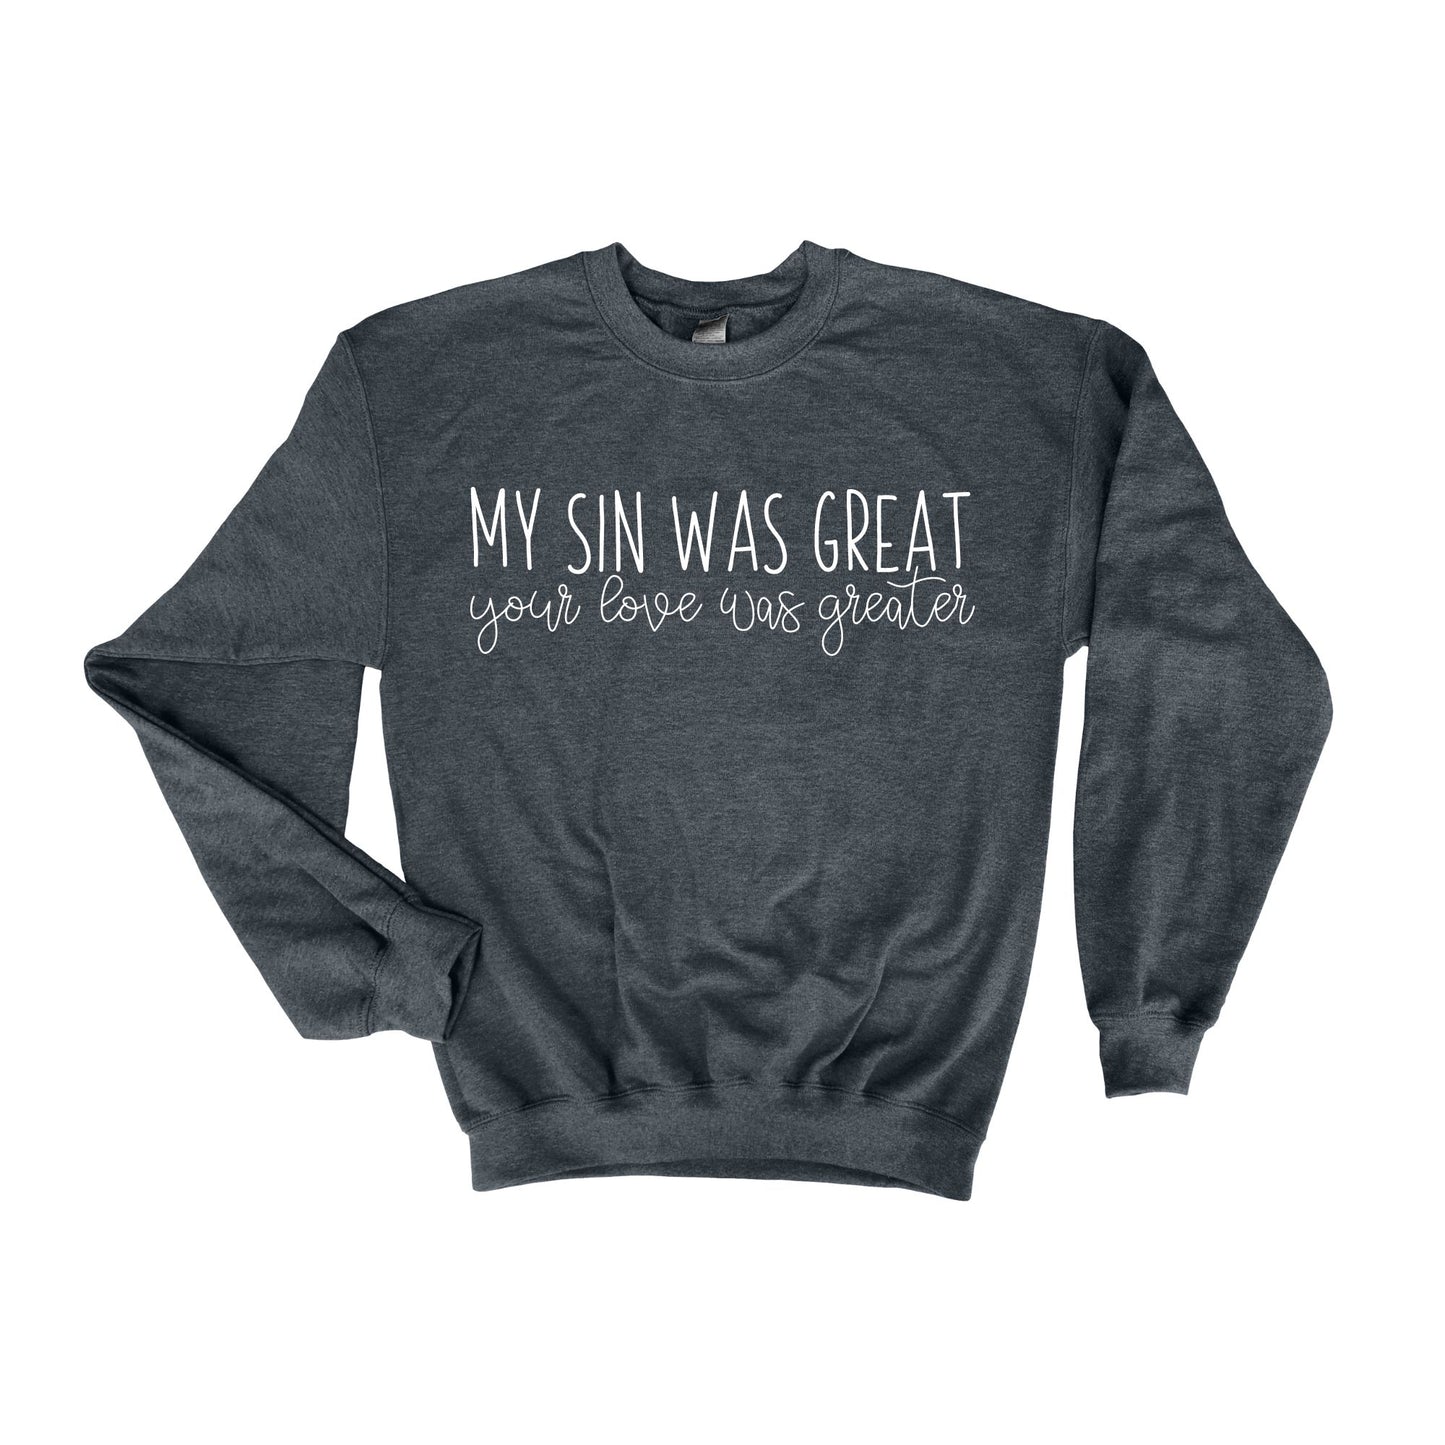 Your Love Was Greater Christian Saying Sweatshirt